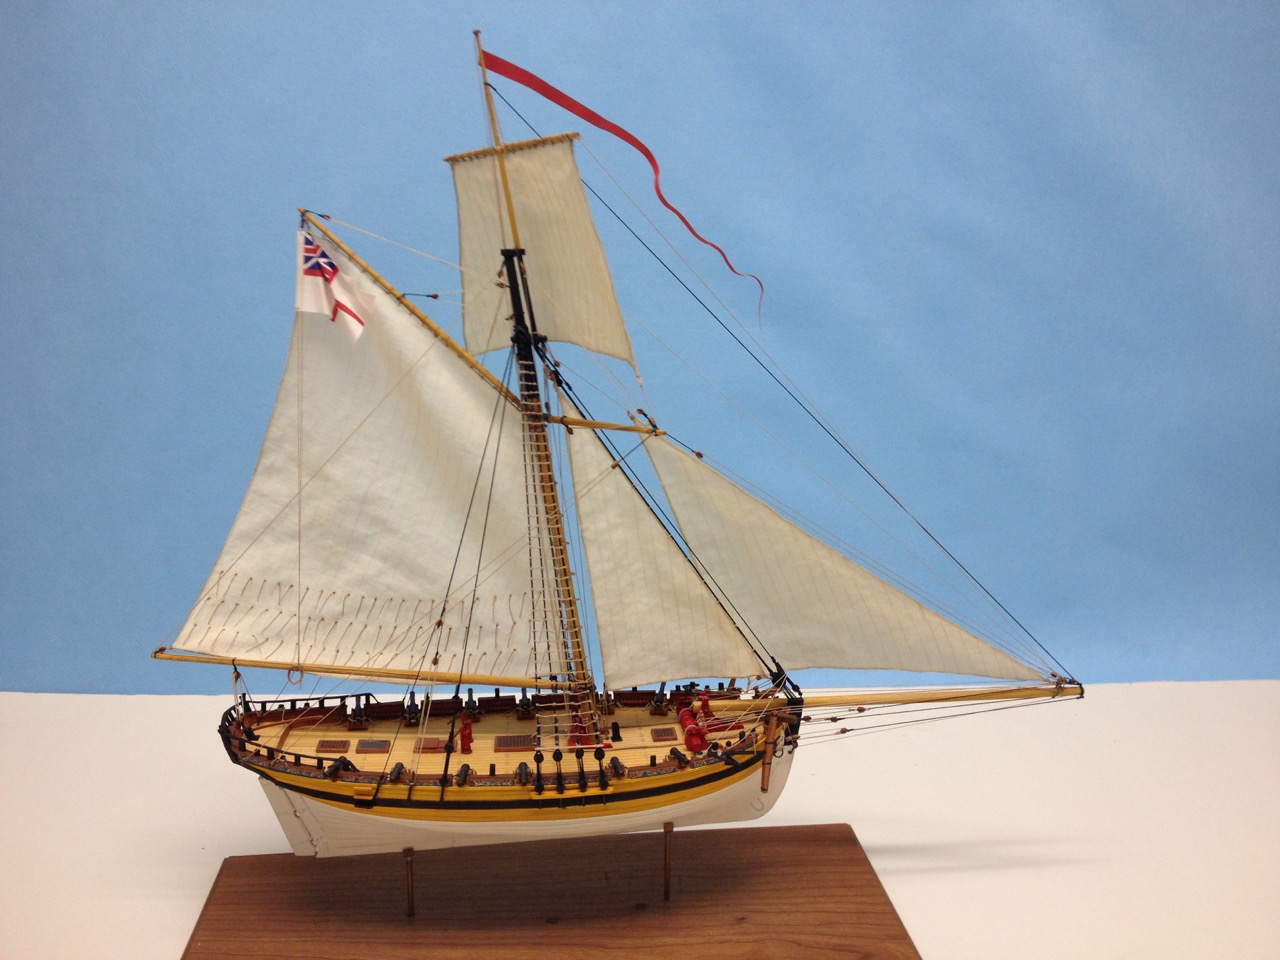 HMS Alert, Paper Model, 1:96 scale, by catopower